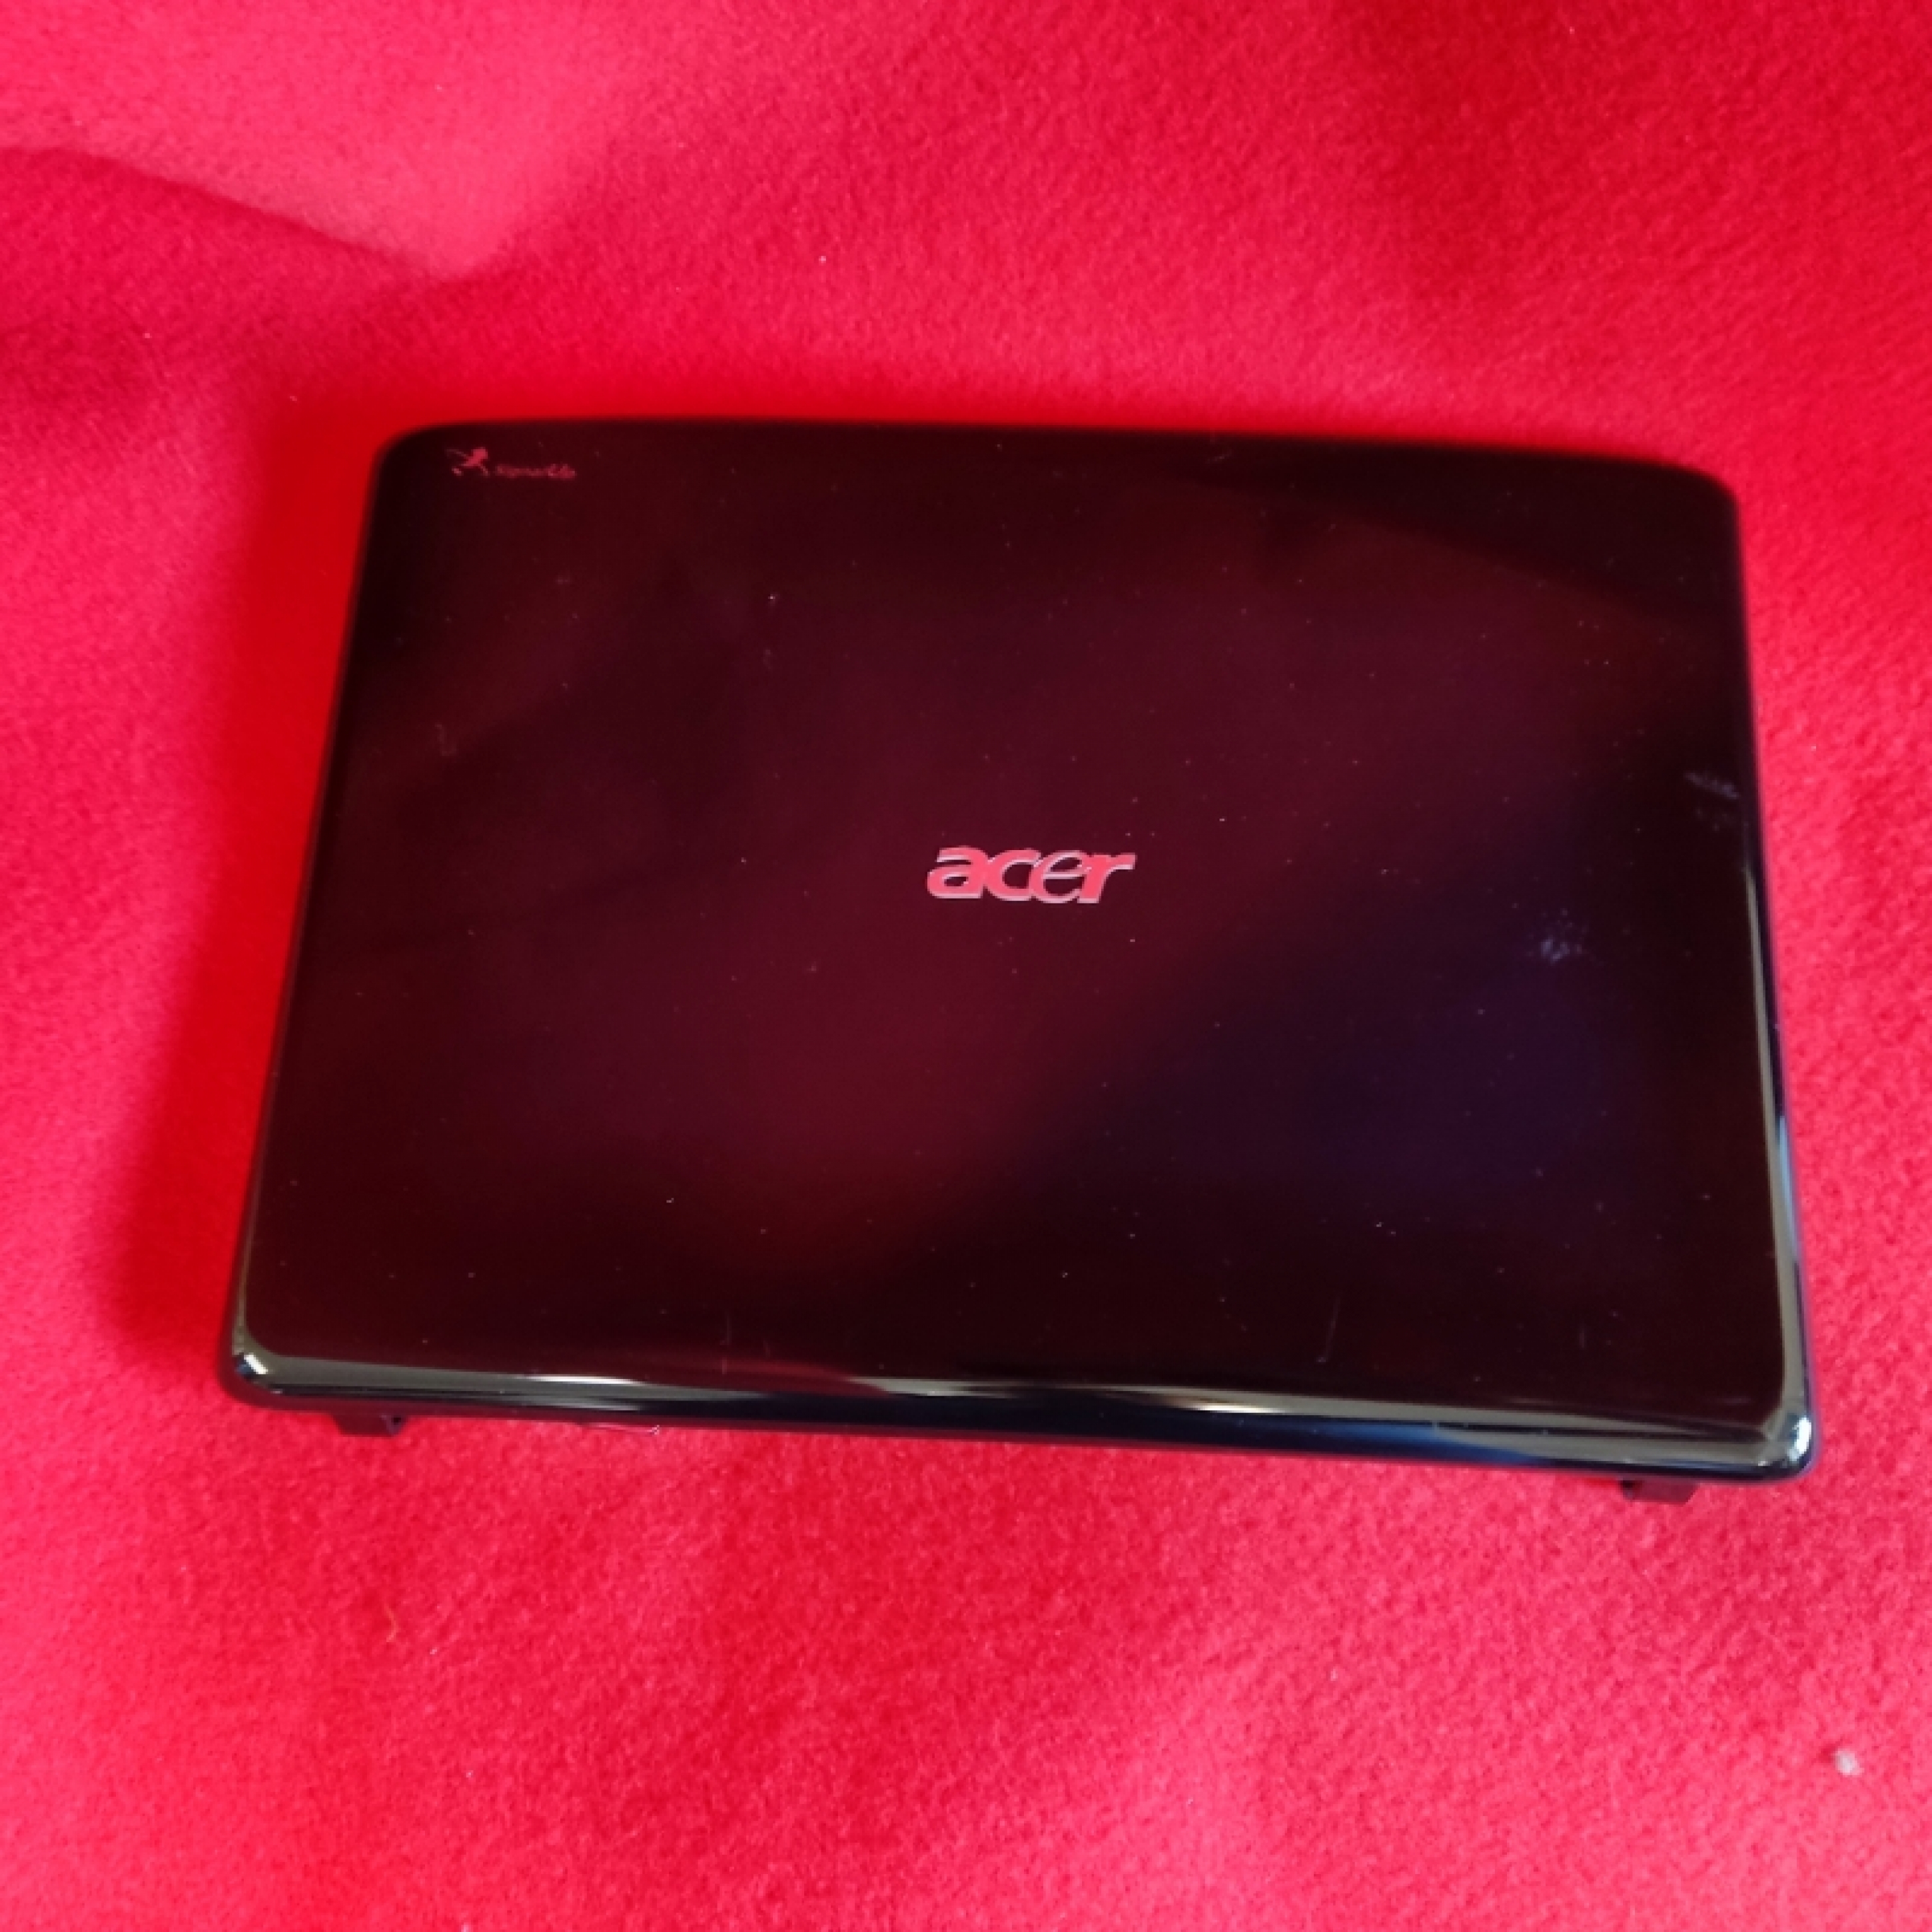 4 -  Scocche complete Acer Aspire 5530g complete